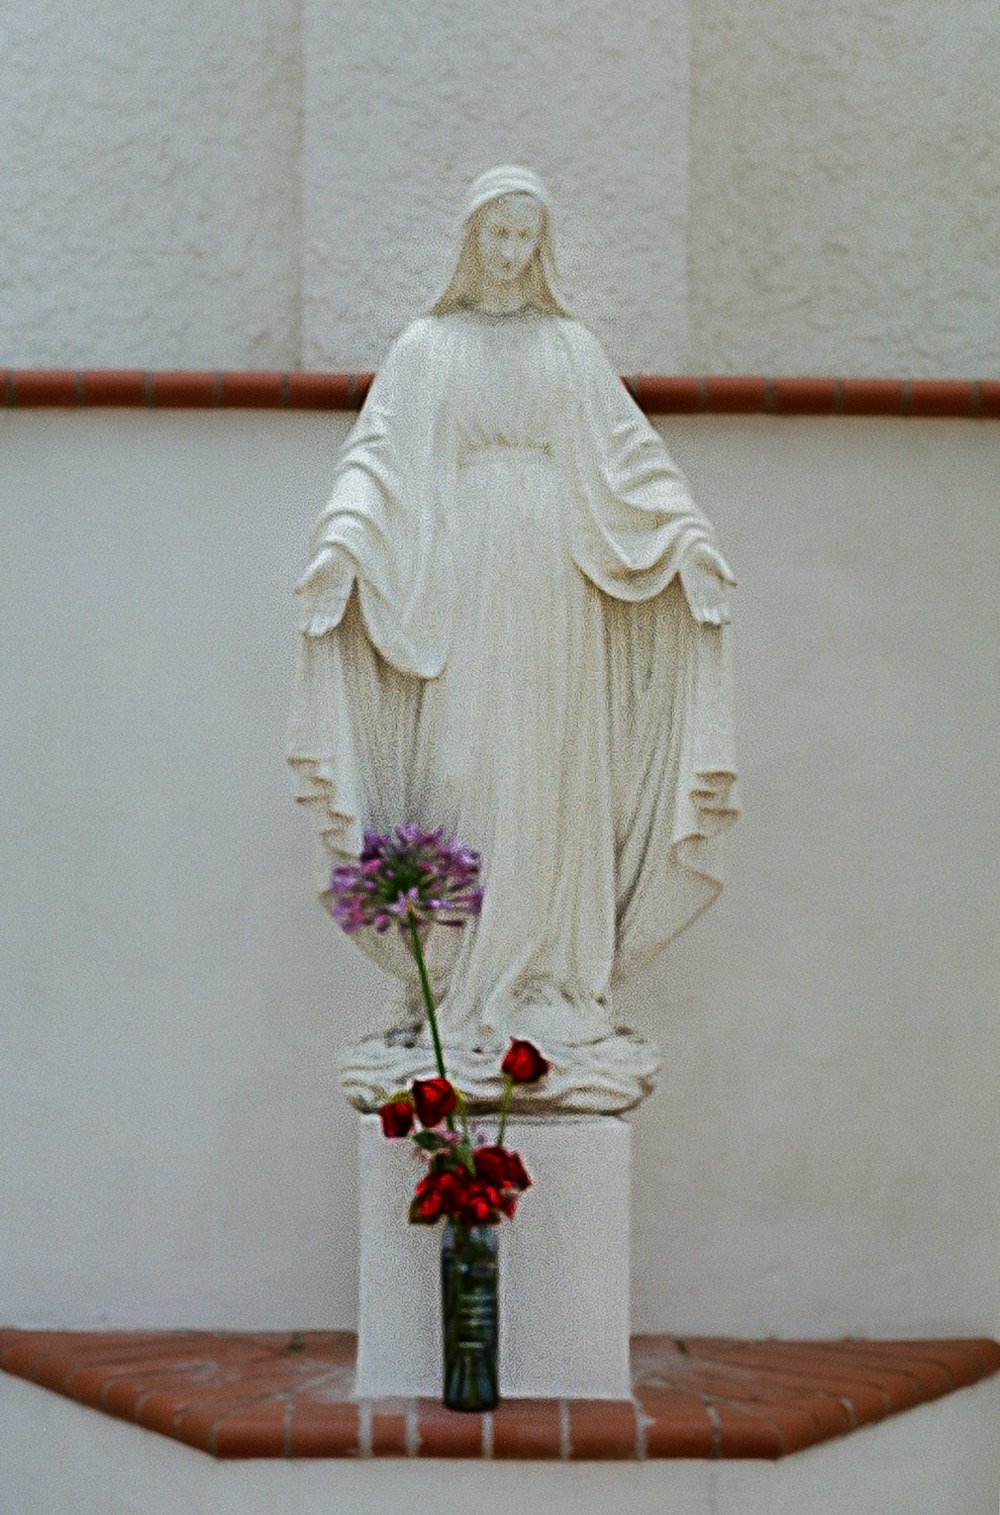 a statue of a person in a white dress and a vase of flowers